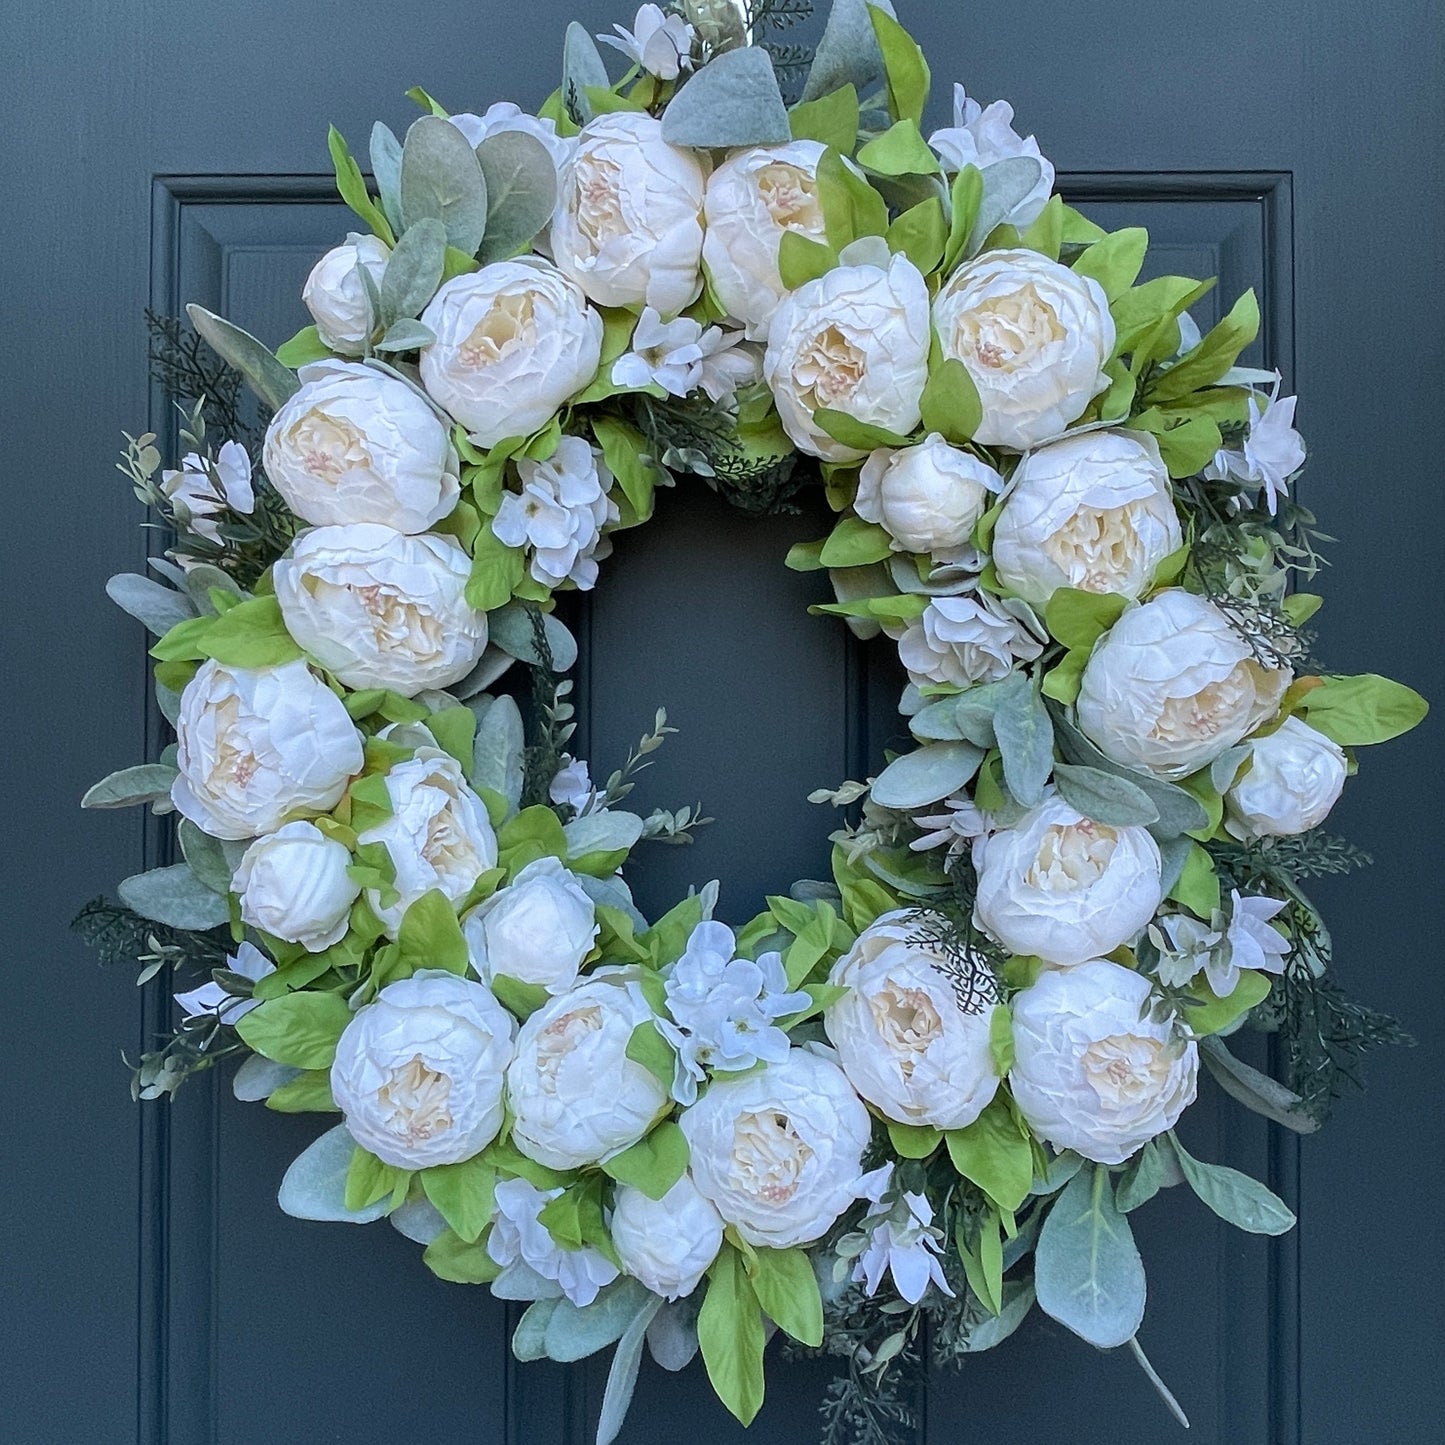 24" wreath has been handcrafted on a grapevine base and is trimmed with soft white peonies , hydrangeas, and other floral accents on a bed of flocked lambs ear. Wreath is hanging from a gold wreath hanger on a dark blue door.